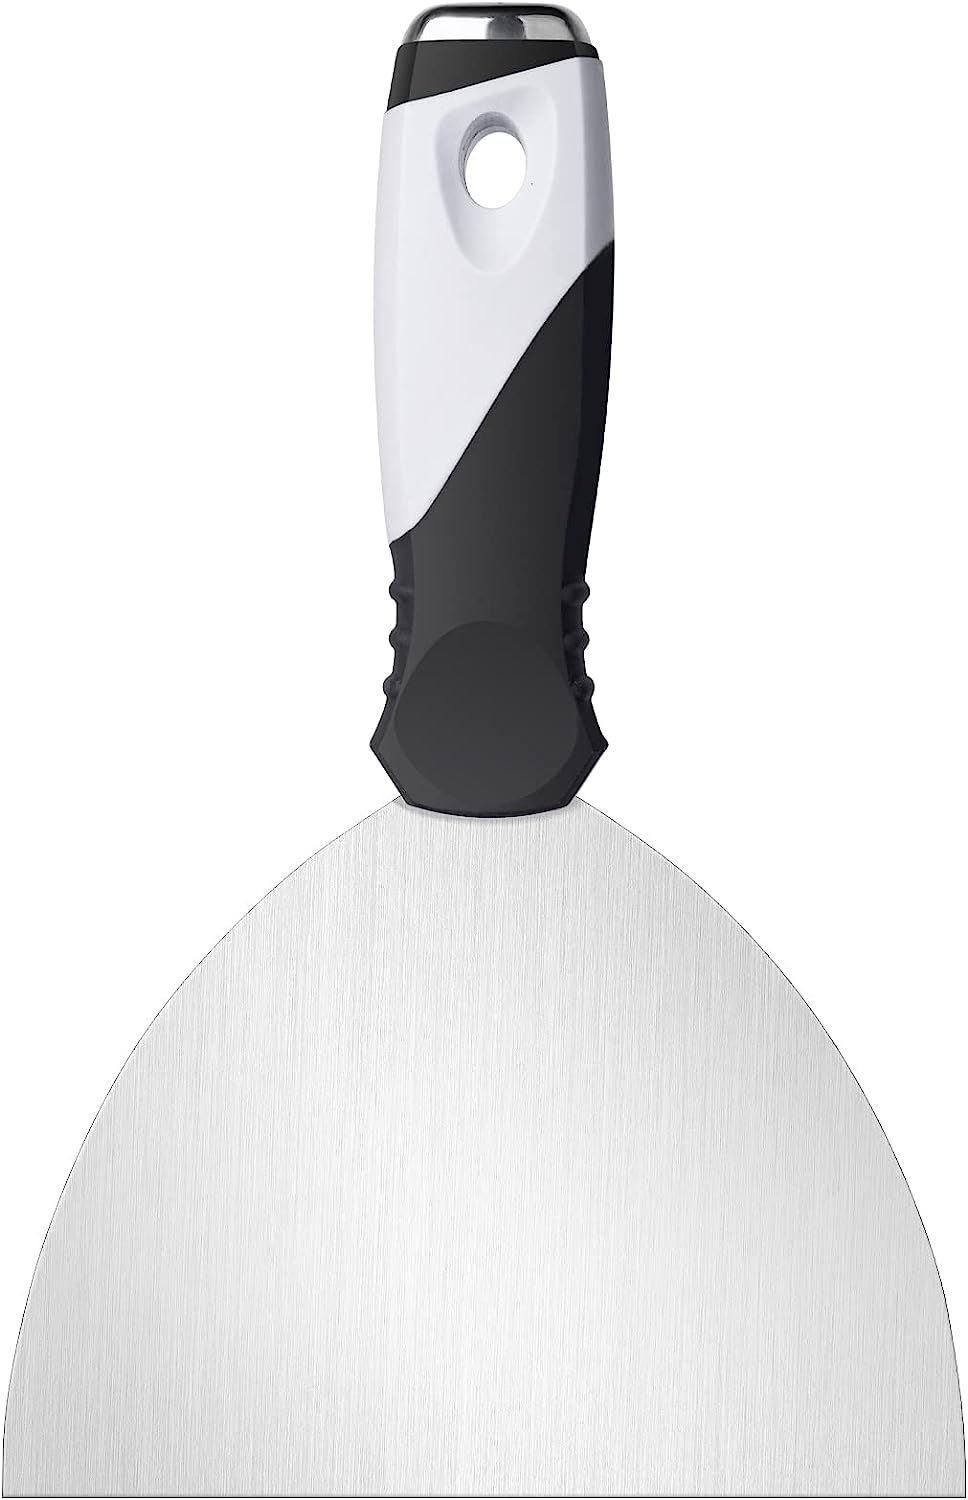 Mister Rui - Putty Knife, 6 Inch Metal Putty Knife [...]